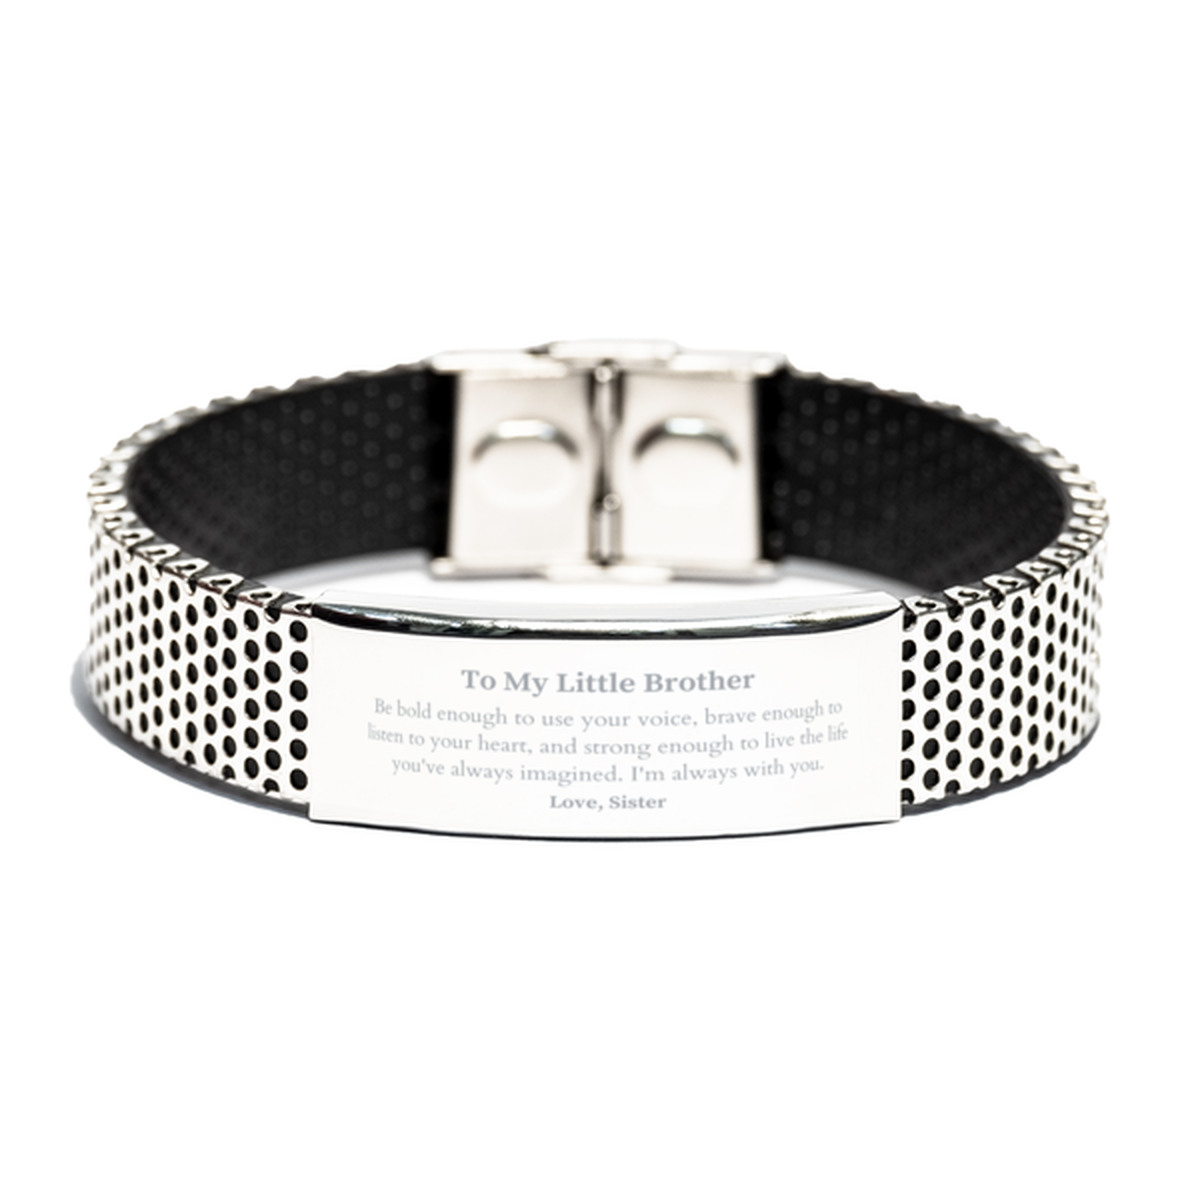 Keepsake Little Brother Stainless Steel Bracelet Gift Idea Graduation Christmas Birthday Little Brother from Sister, Little Brother Be bold enough to use your voice, brave enough to listen to your heart. Love, Sister